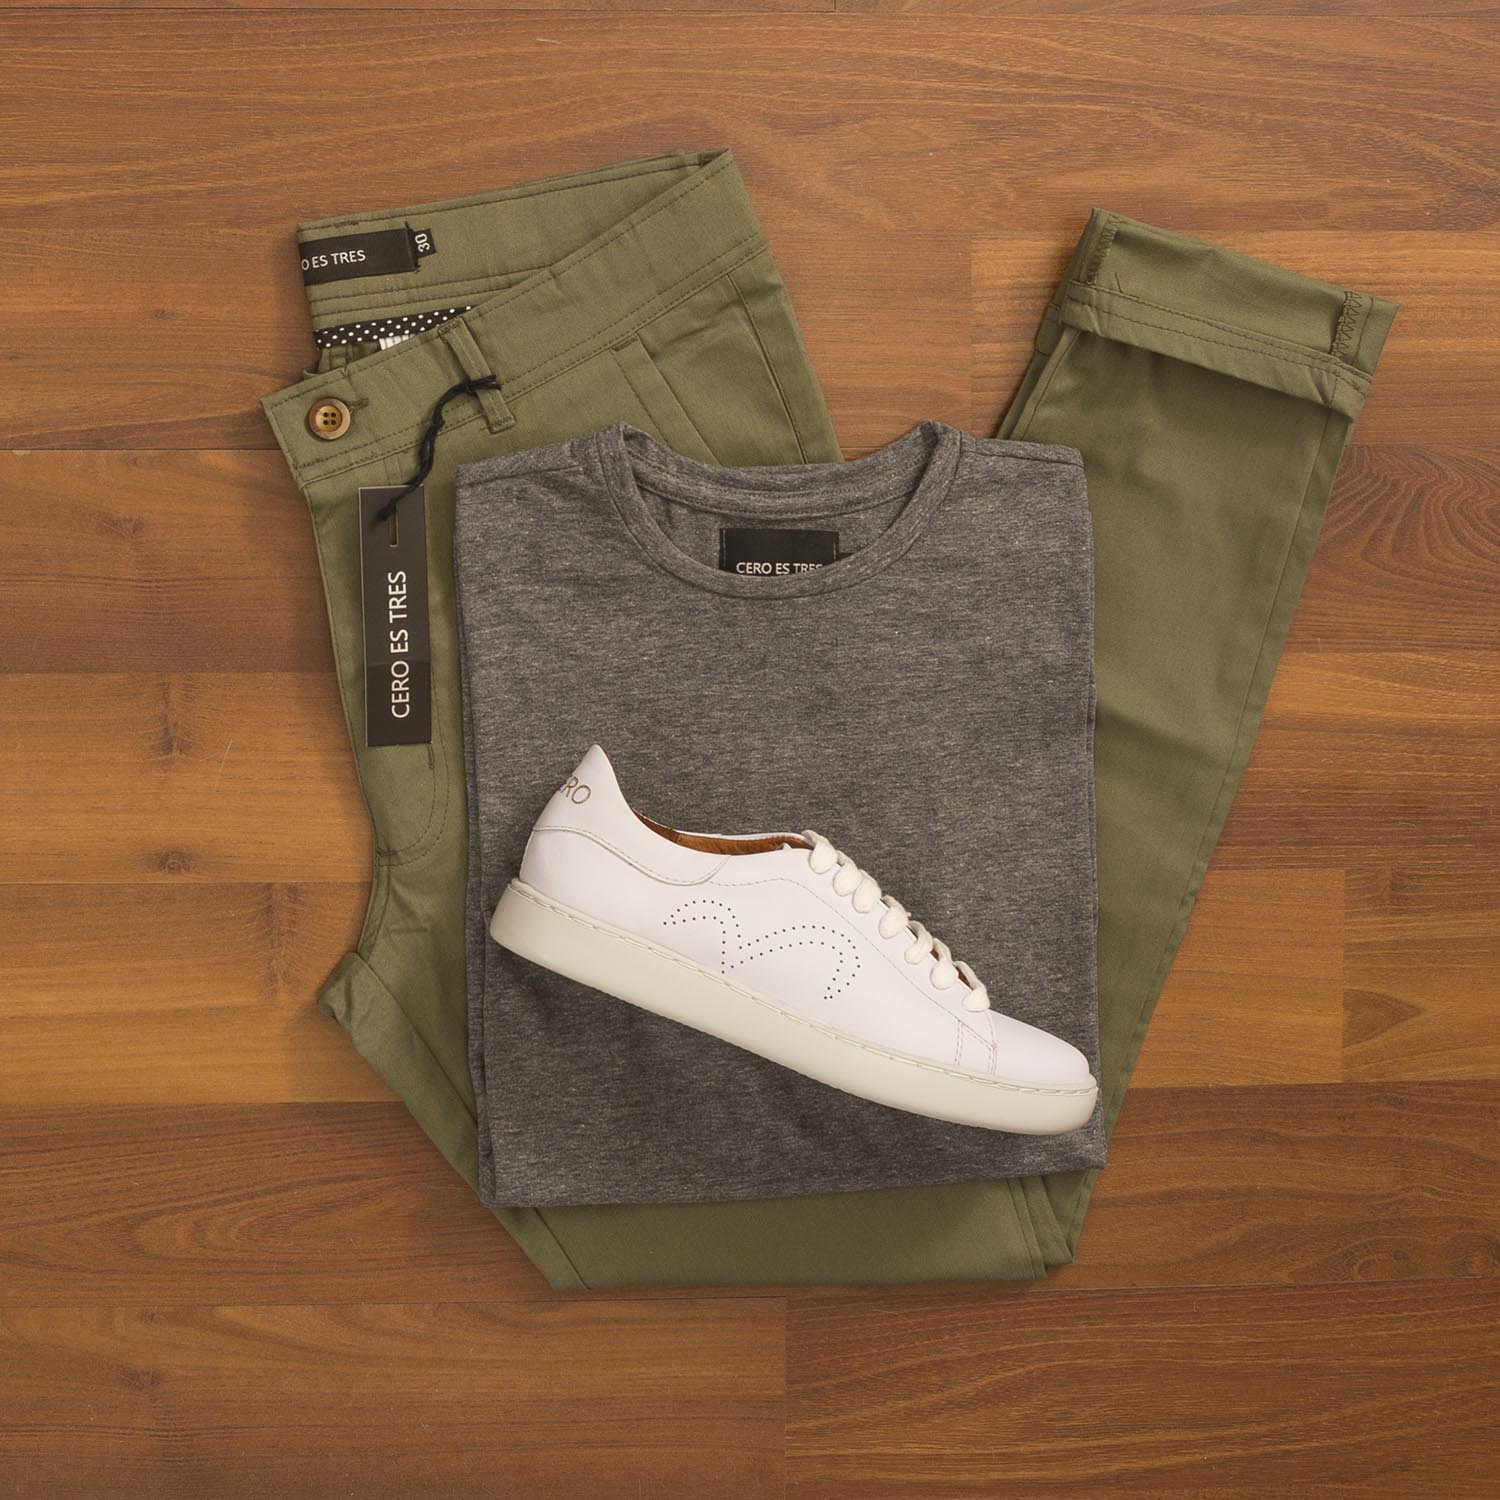 OUTFIT CERO 216